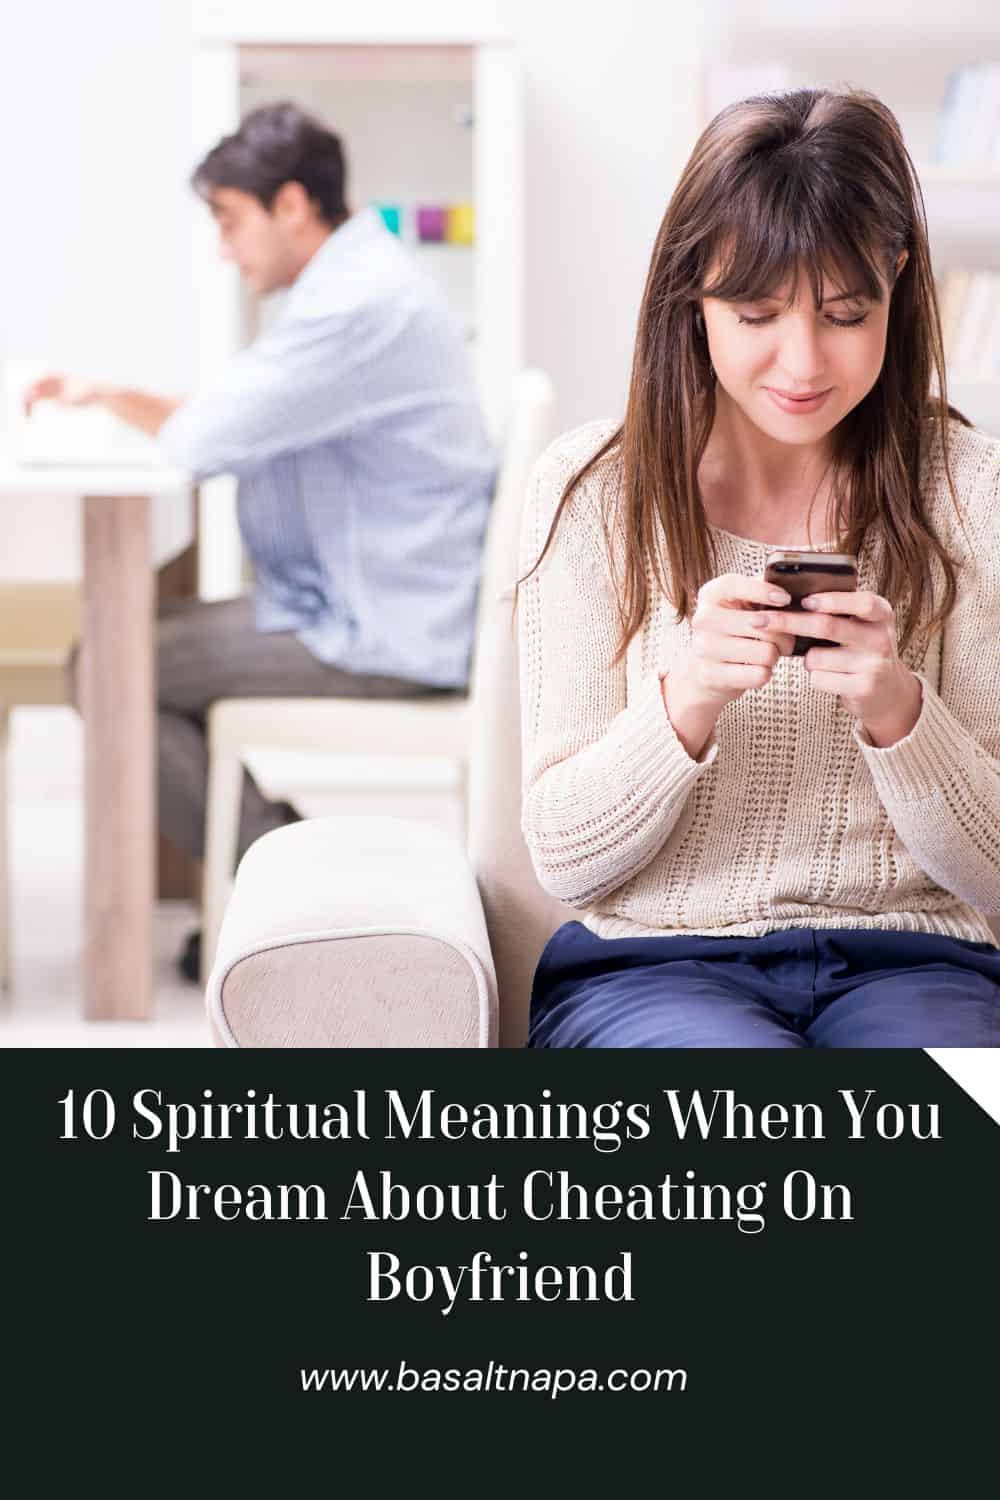 10 Spiritual Meanings When You Dream About Cheating On Boyfriend